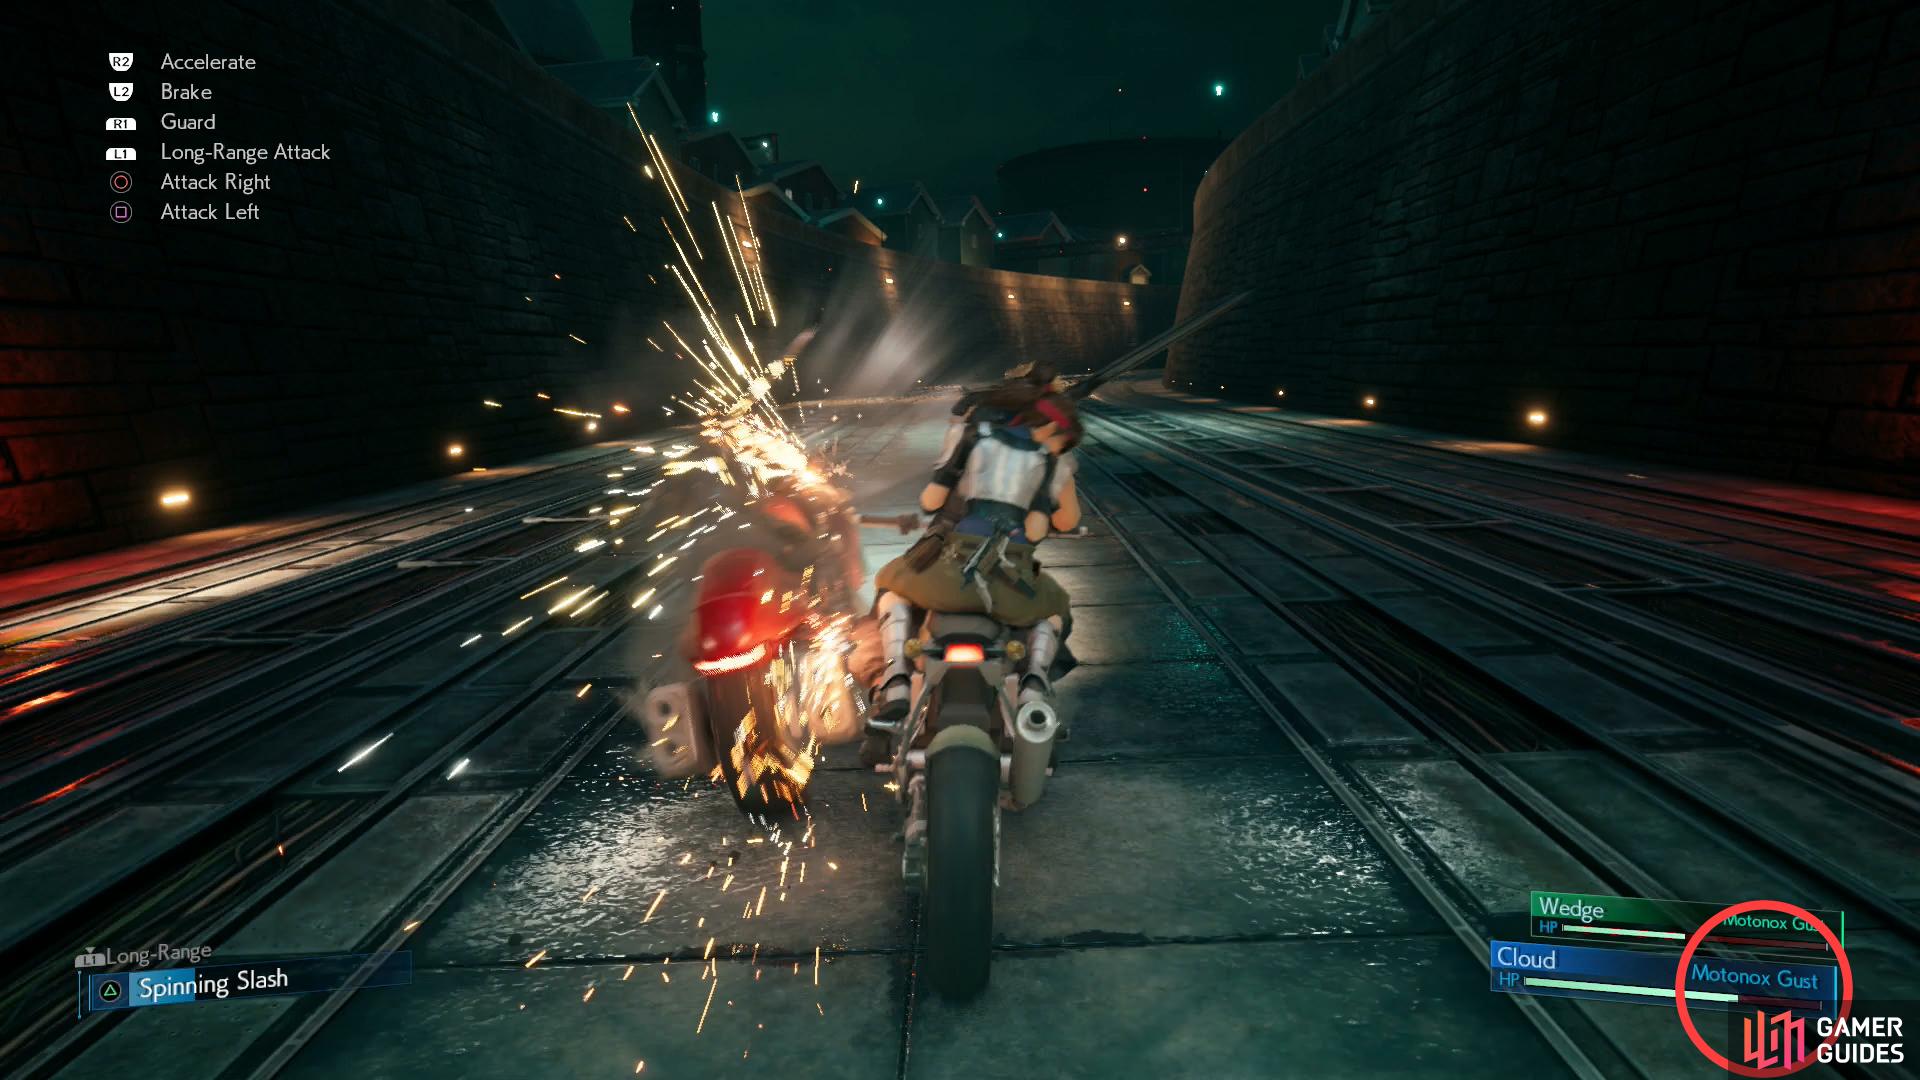 Clear the motorcycle segment with enough HP remaining to secure the "Biker Boy" trophy.